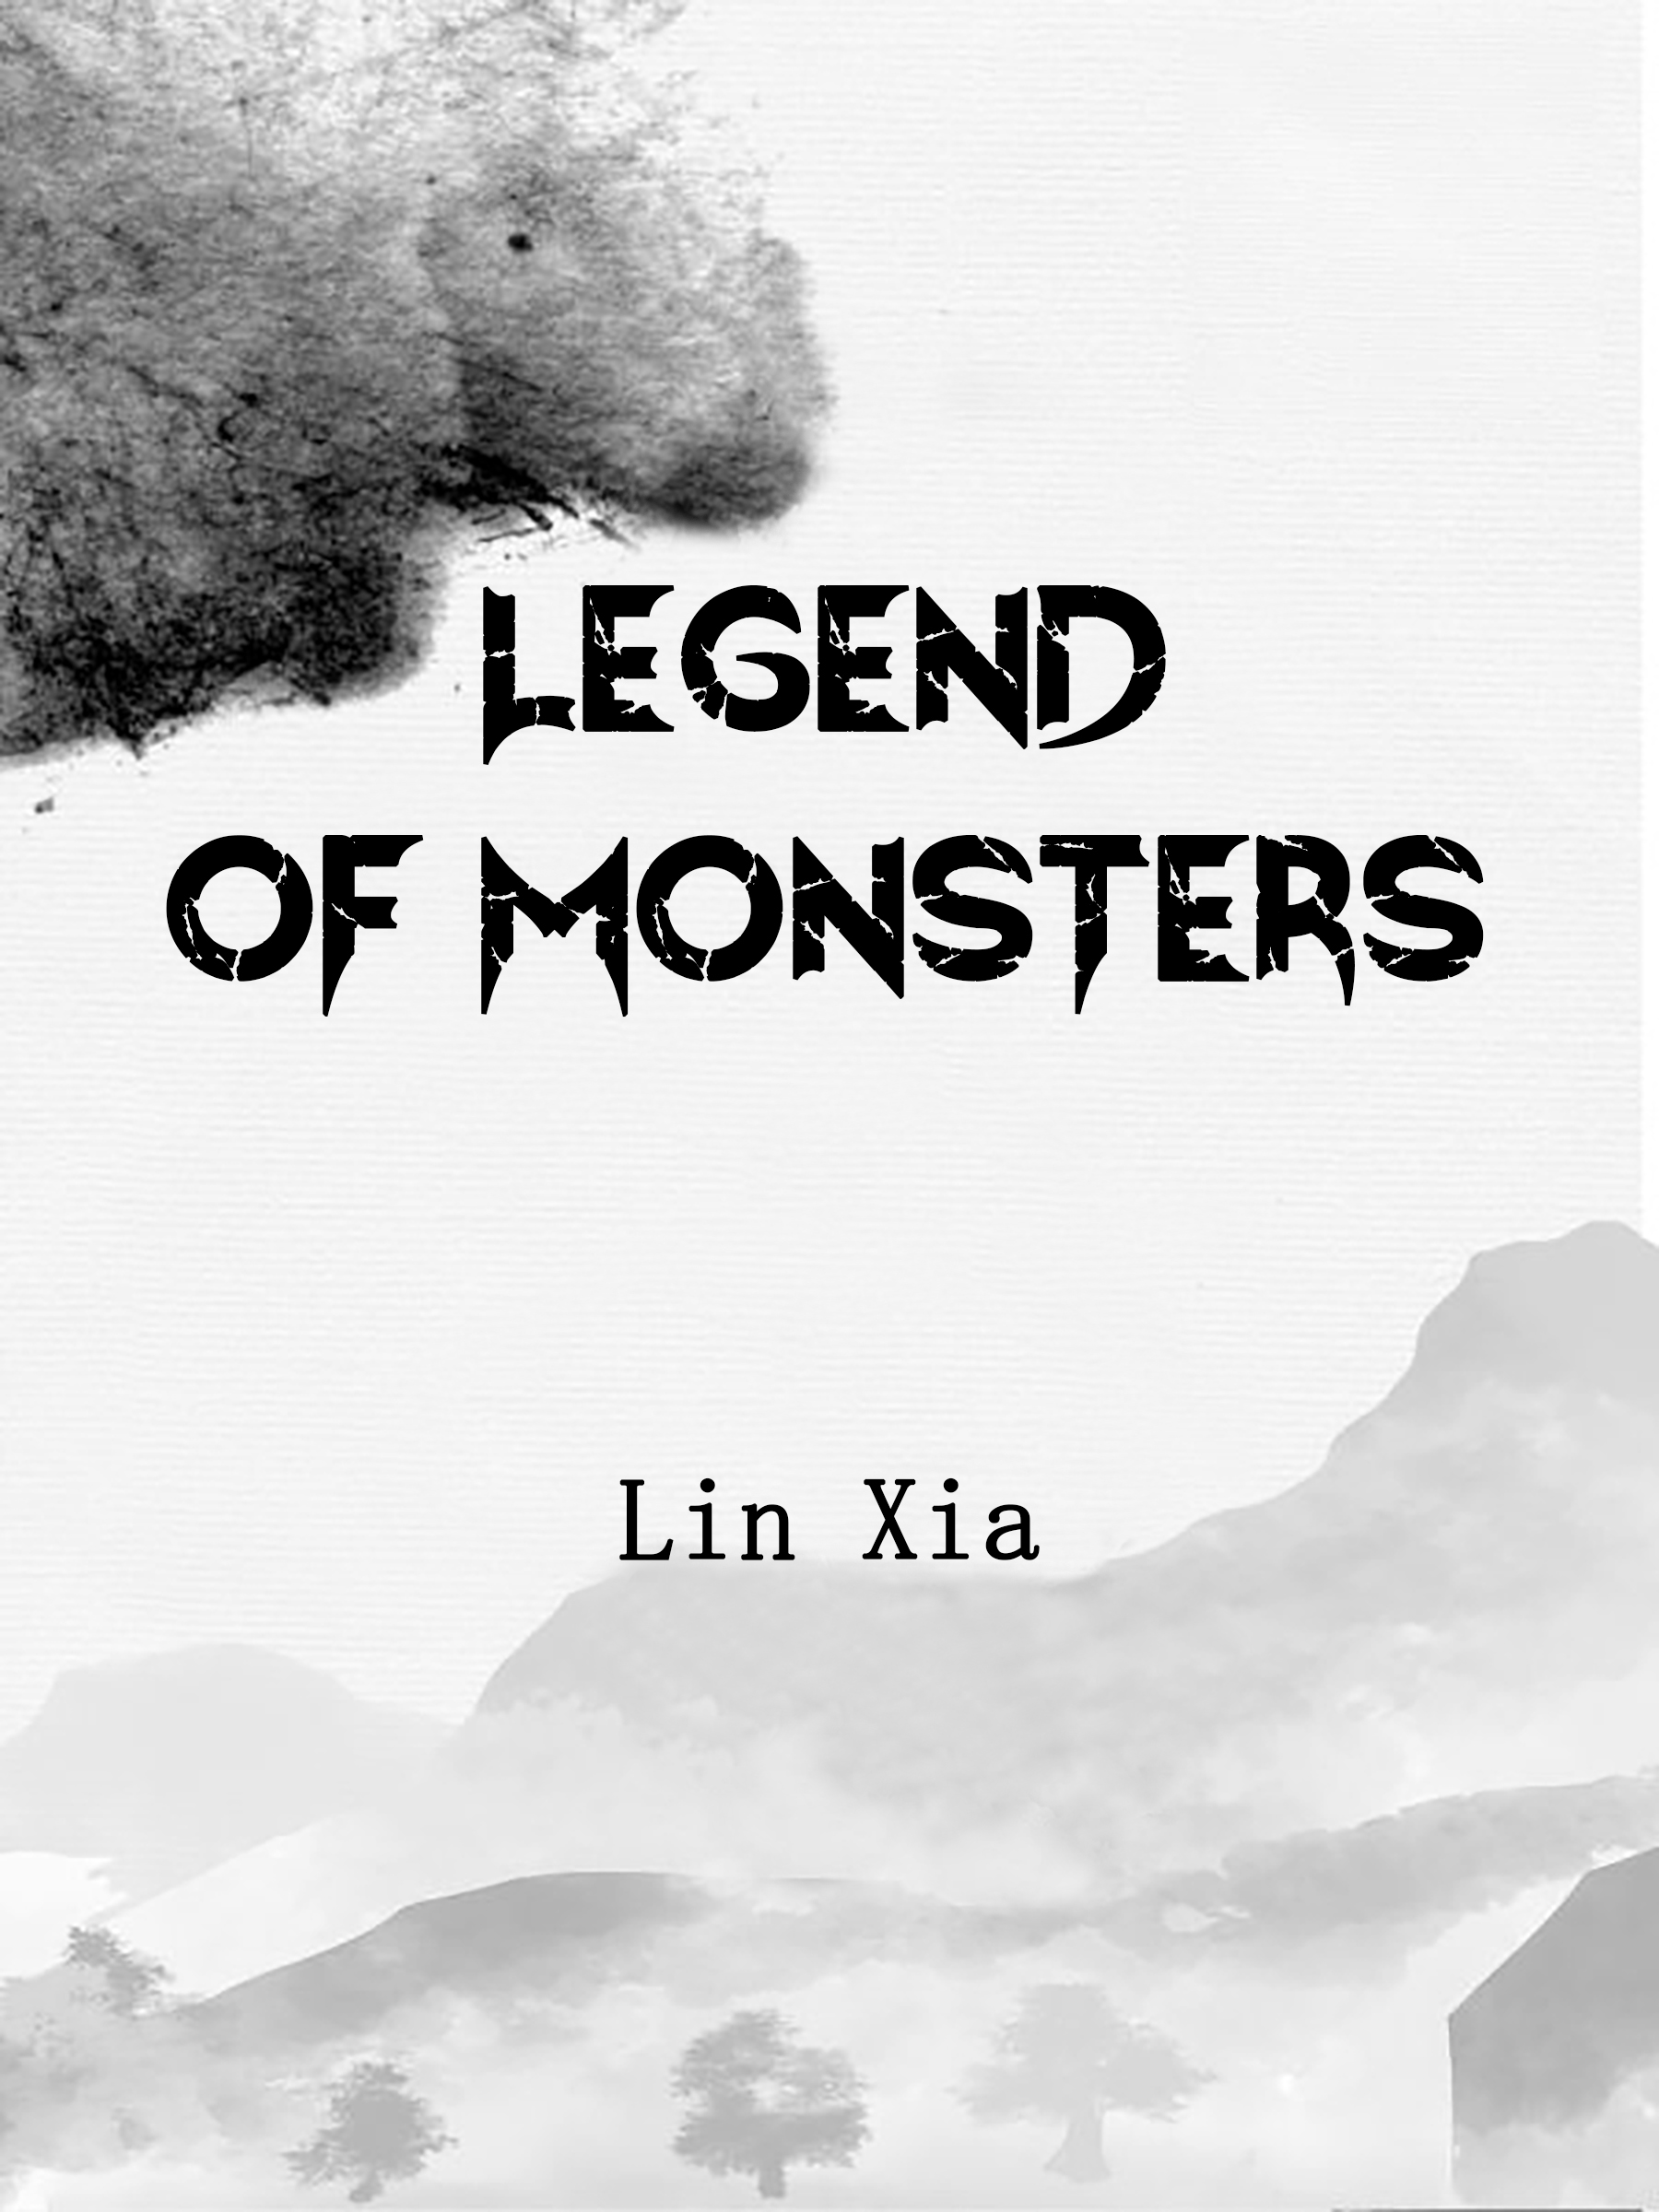 big legend the monster chronicles